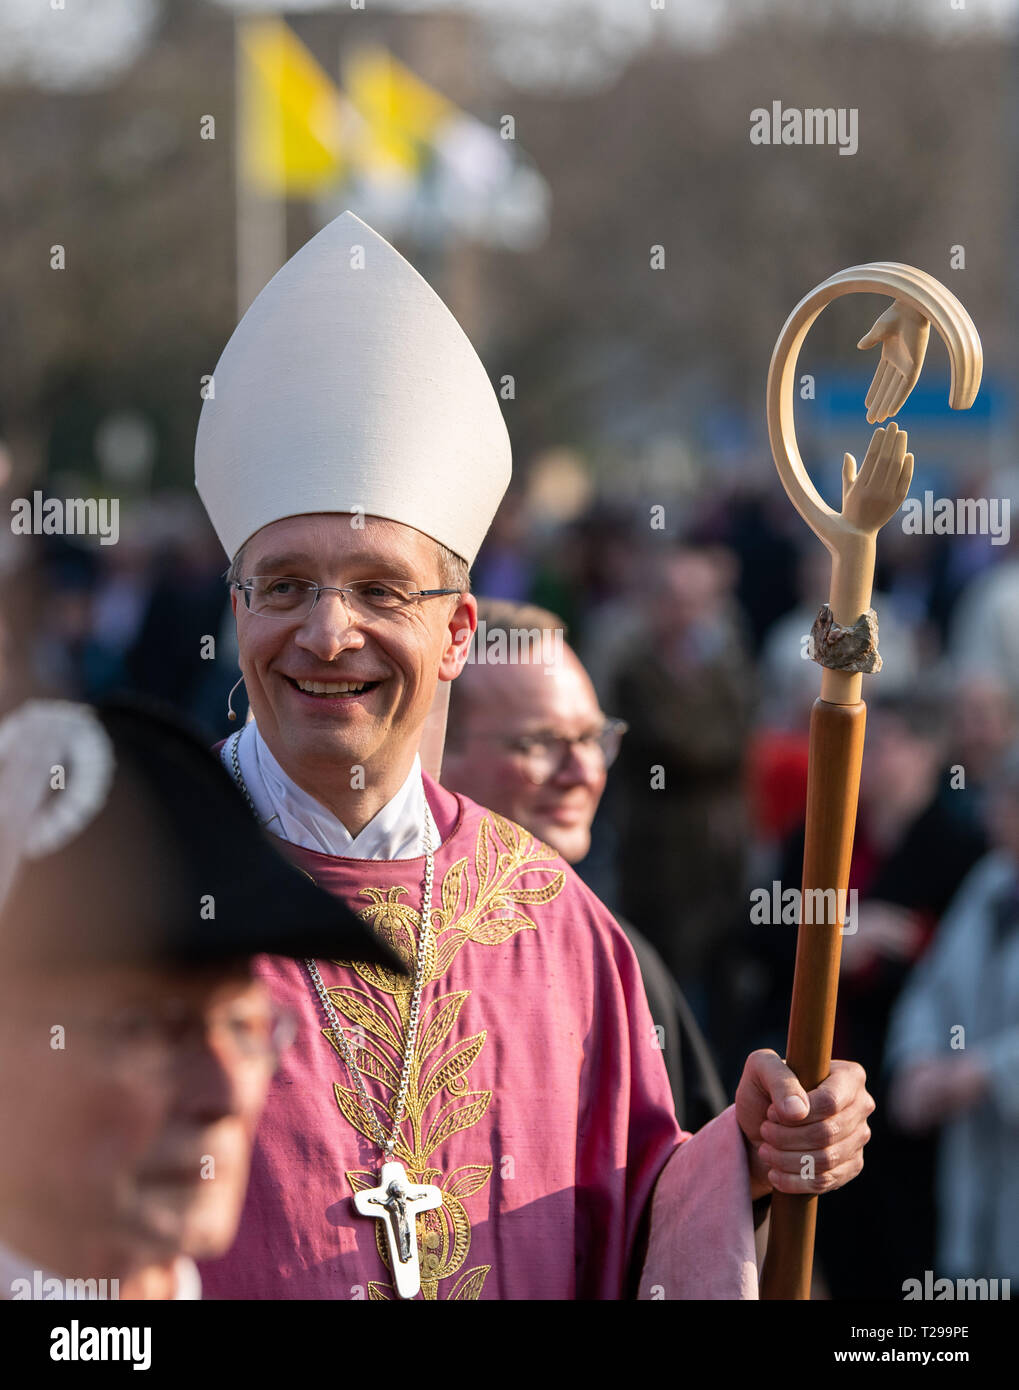 Fulda, Germany. 31st Mar, 2019. Michael Gerber, bishop of Fulda, goes after his solemn inauguration as bishop in front of the cathedral. Gerber (49) succeeds Algermissen and is the youngest bishop of the Catholic Church in Germany. Credit: Silas Stein/dpa/Alamy Live News Stock Photo